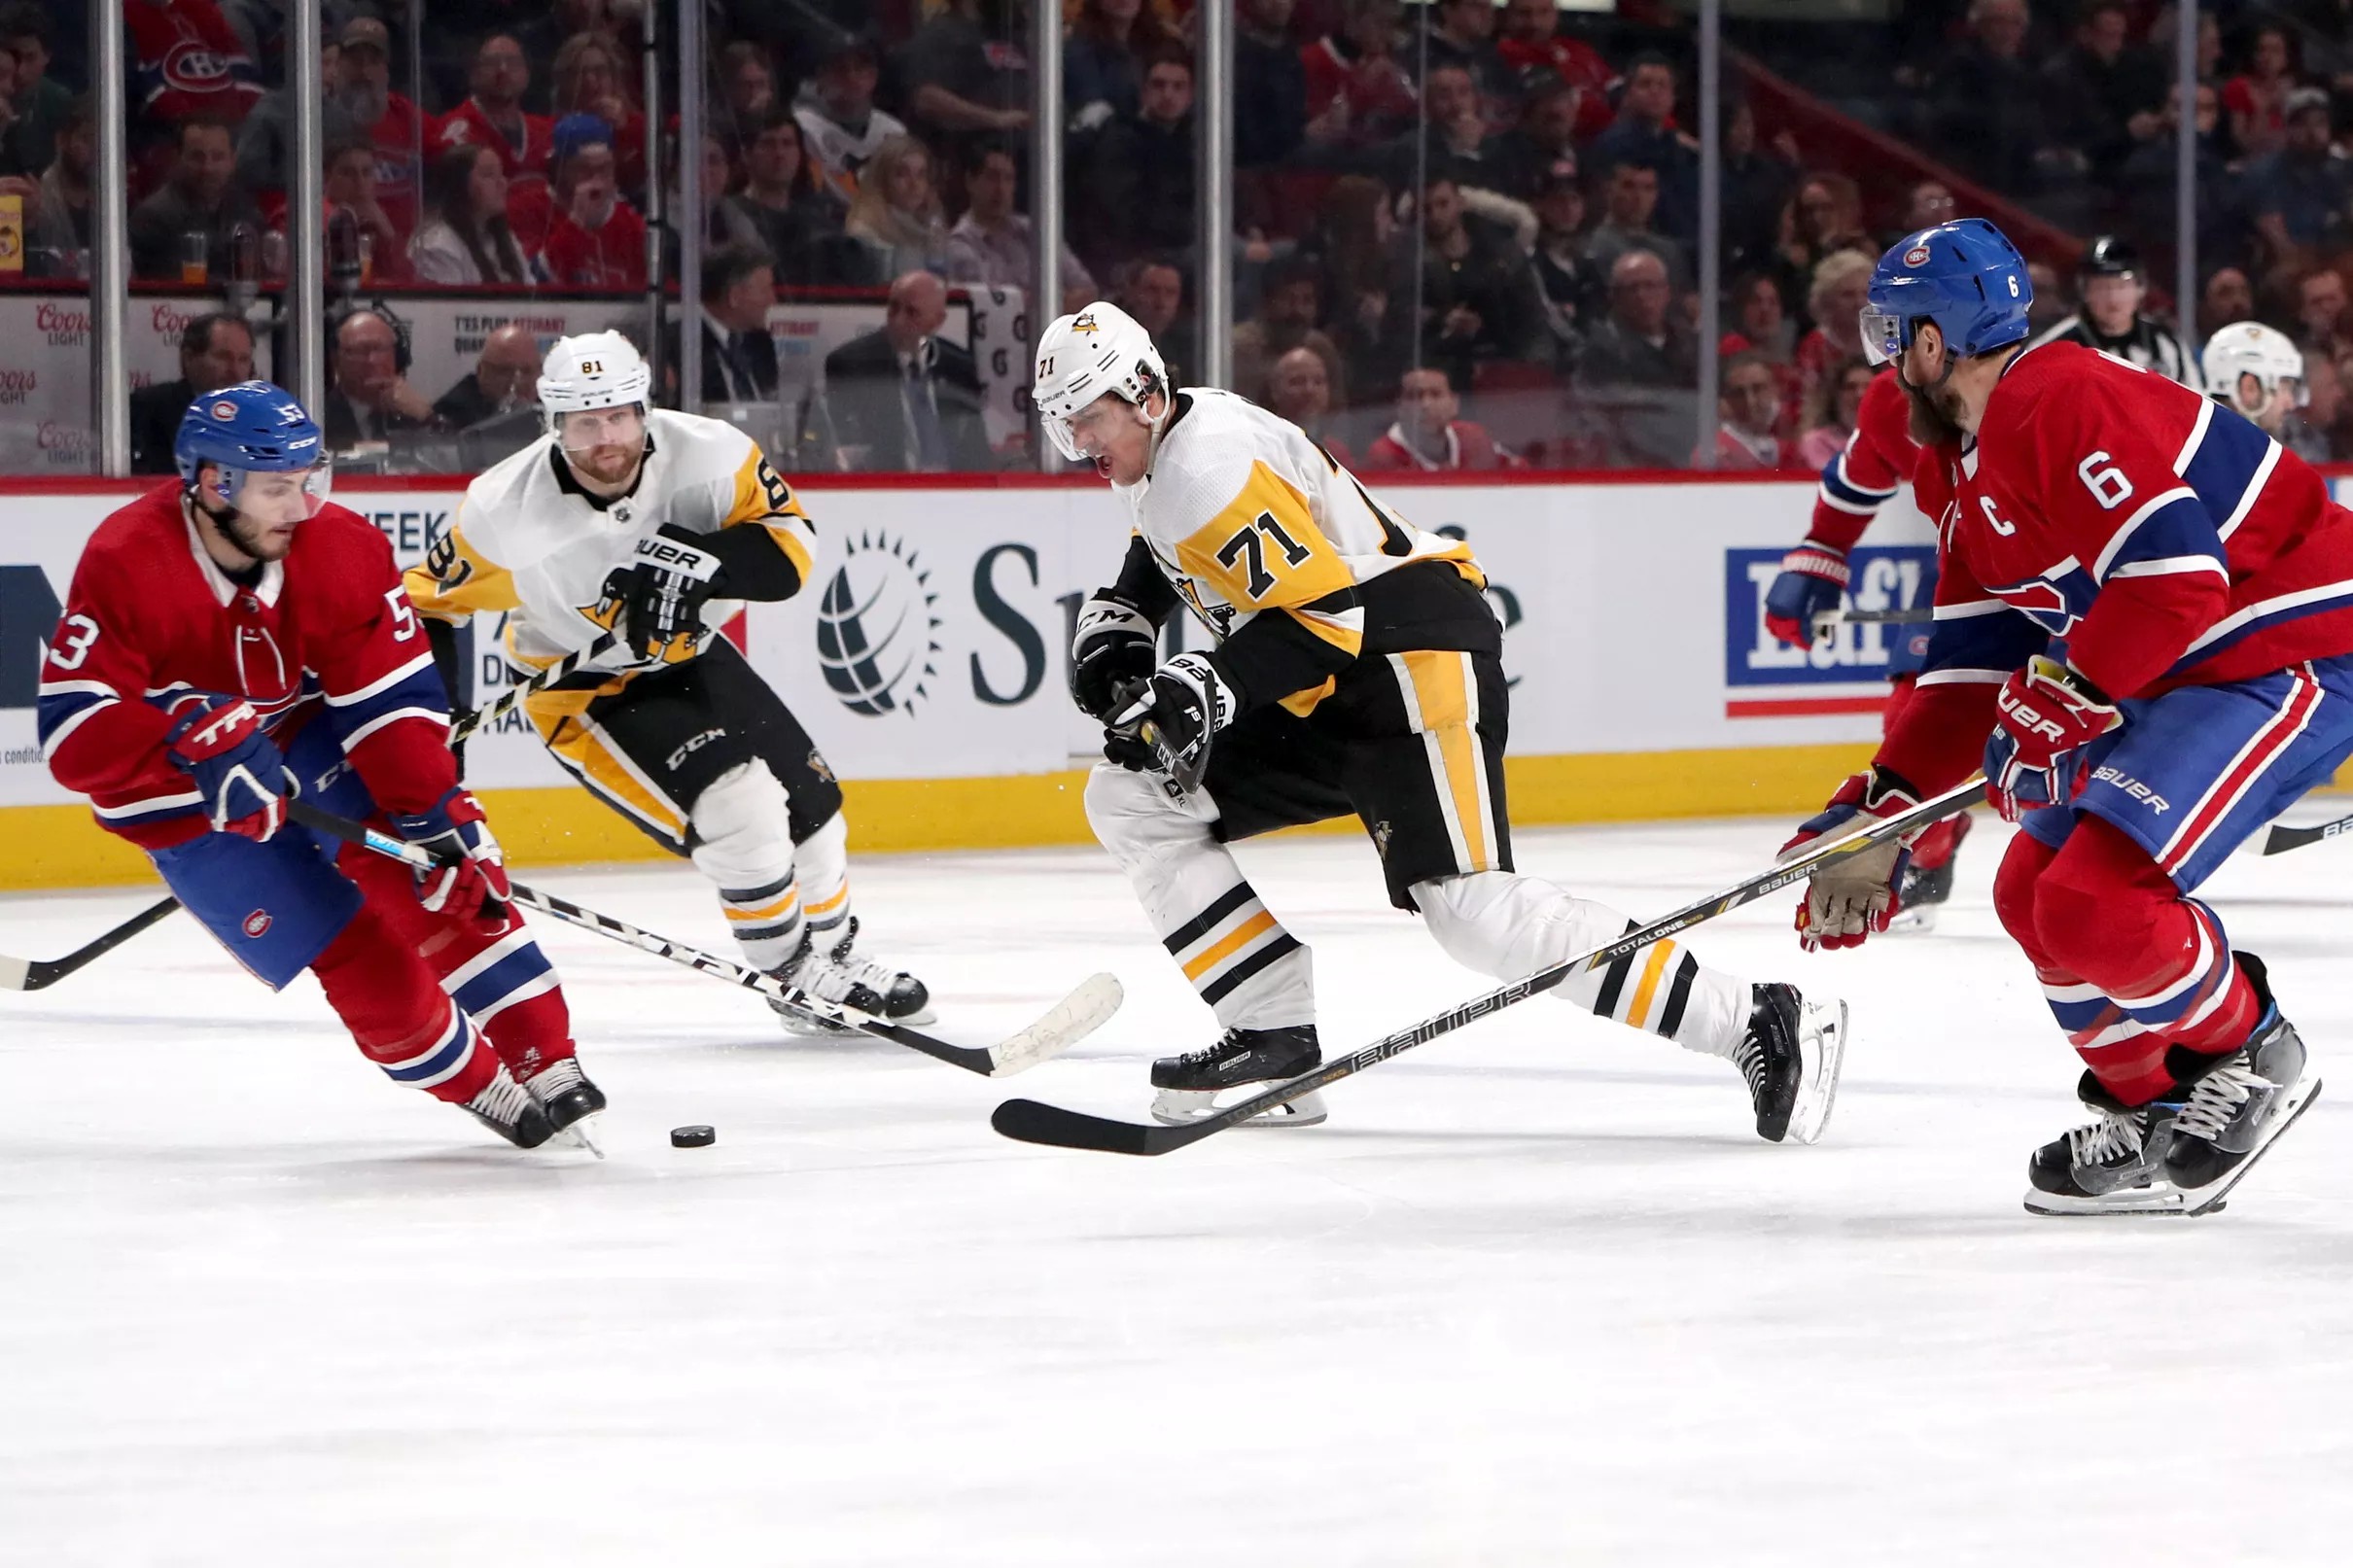 A look at how the Penguins fit into the NHL Playoff picture today